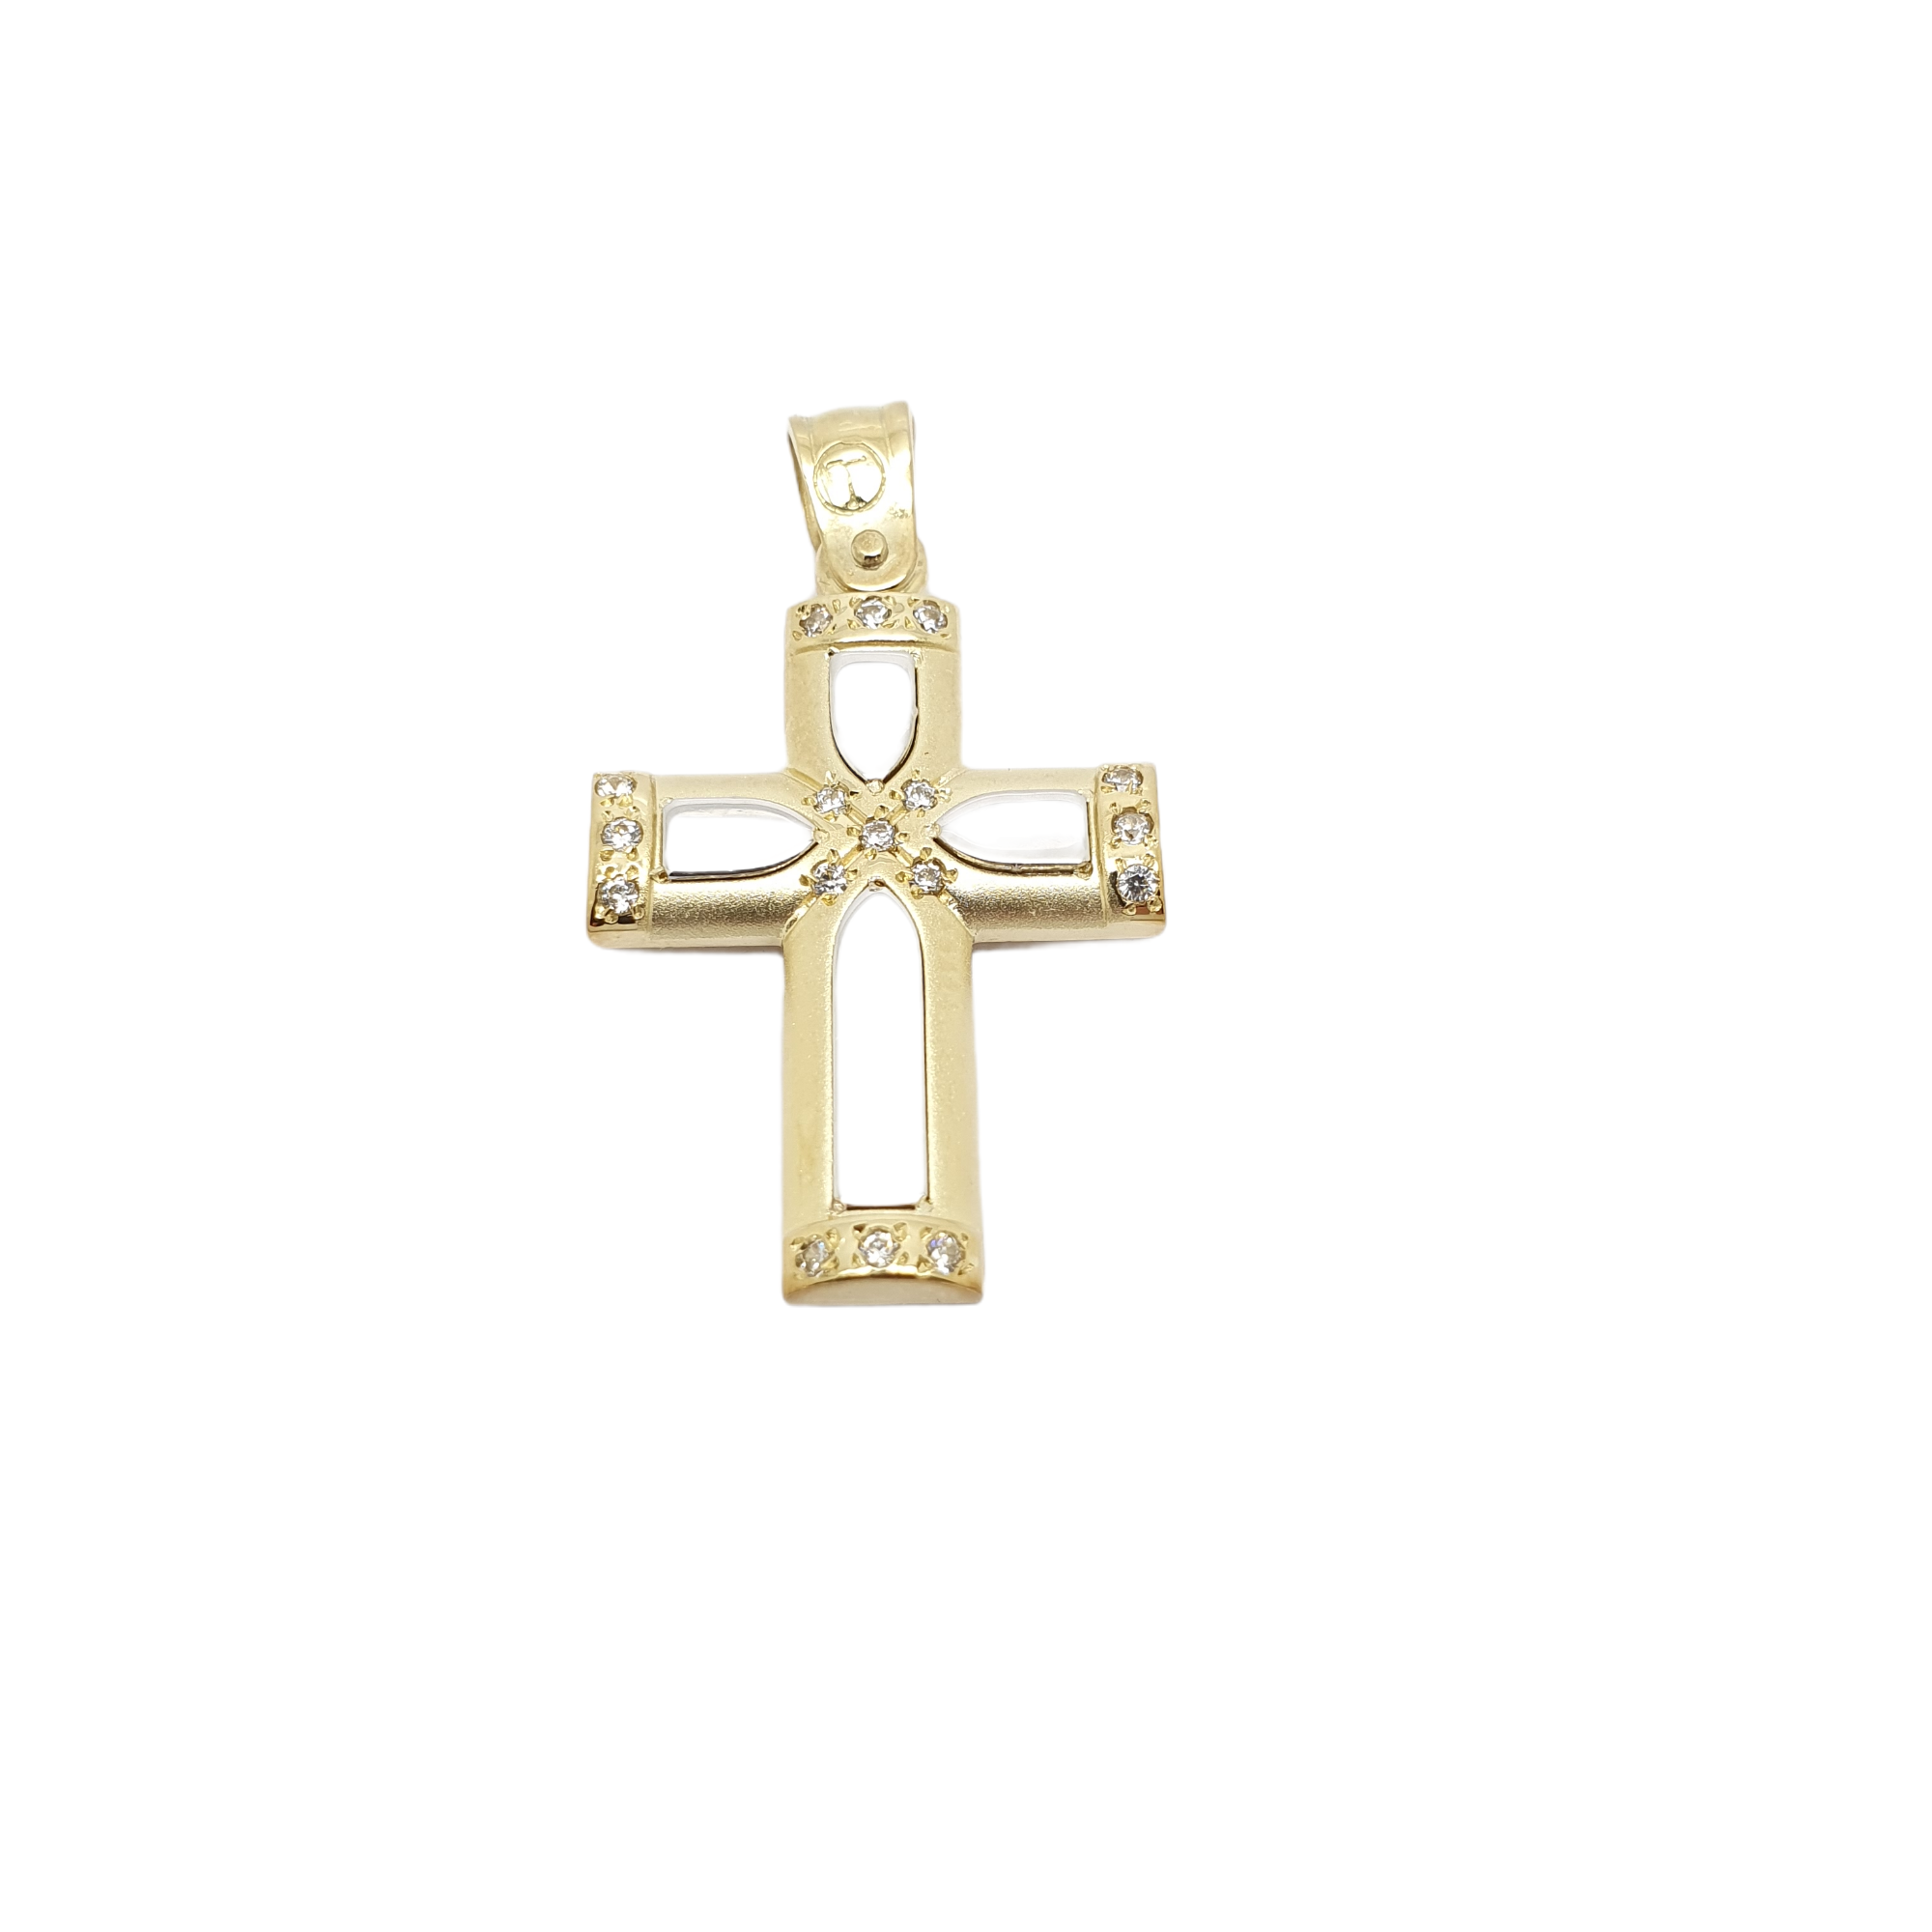 Goden cross k14 with zircon and white gold details k14  (code H1895)